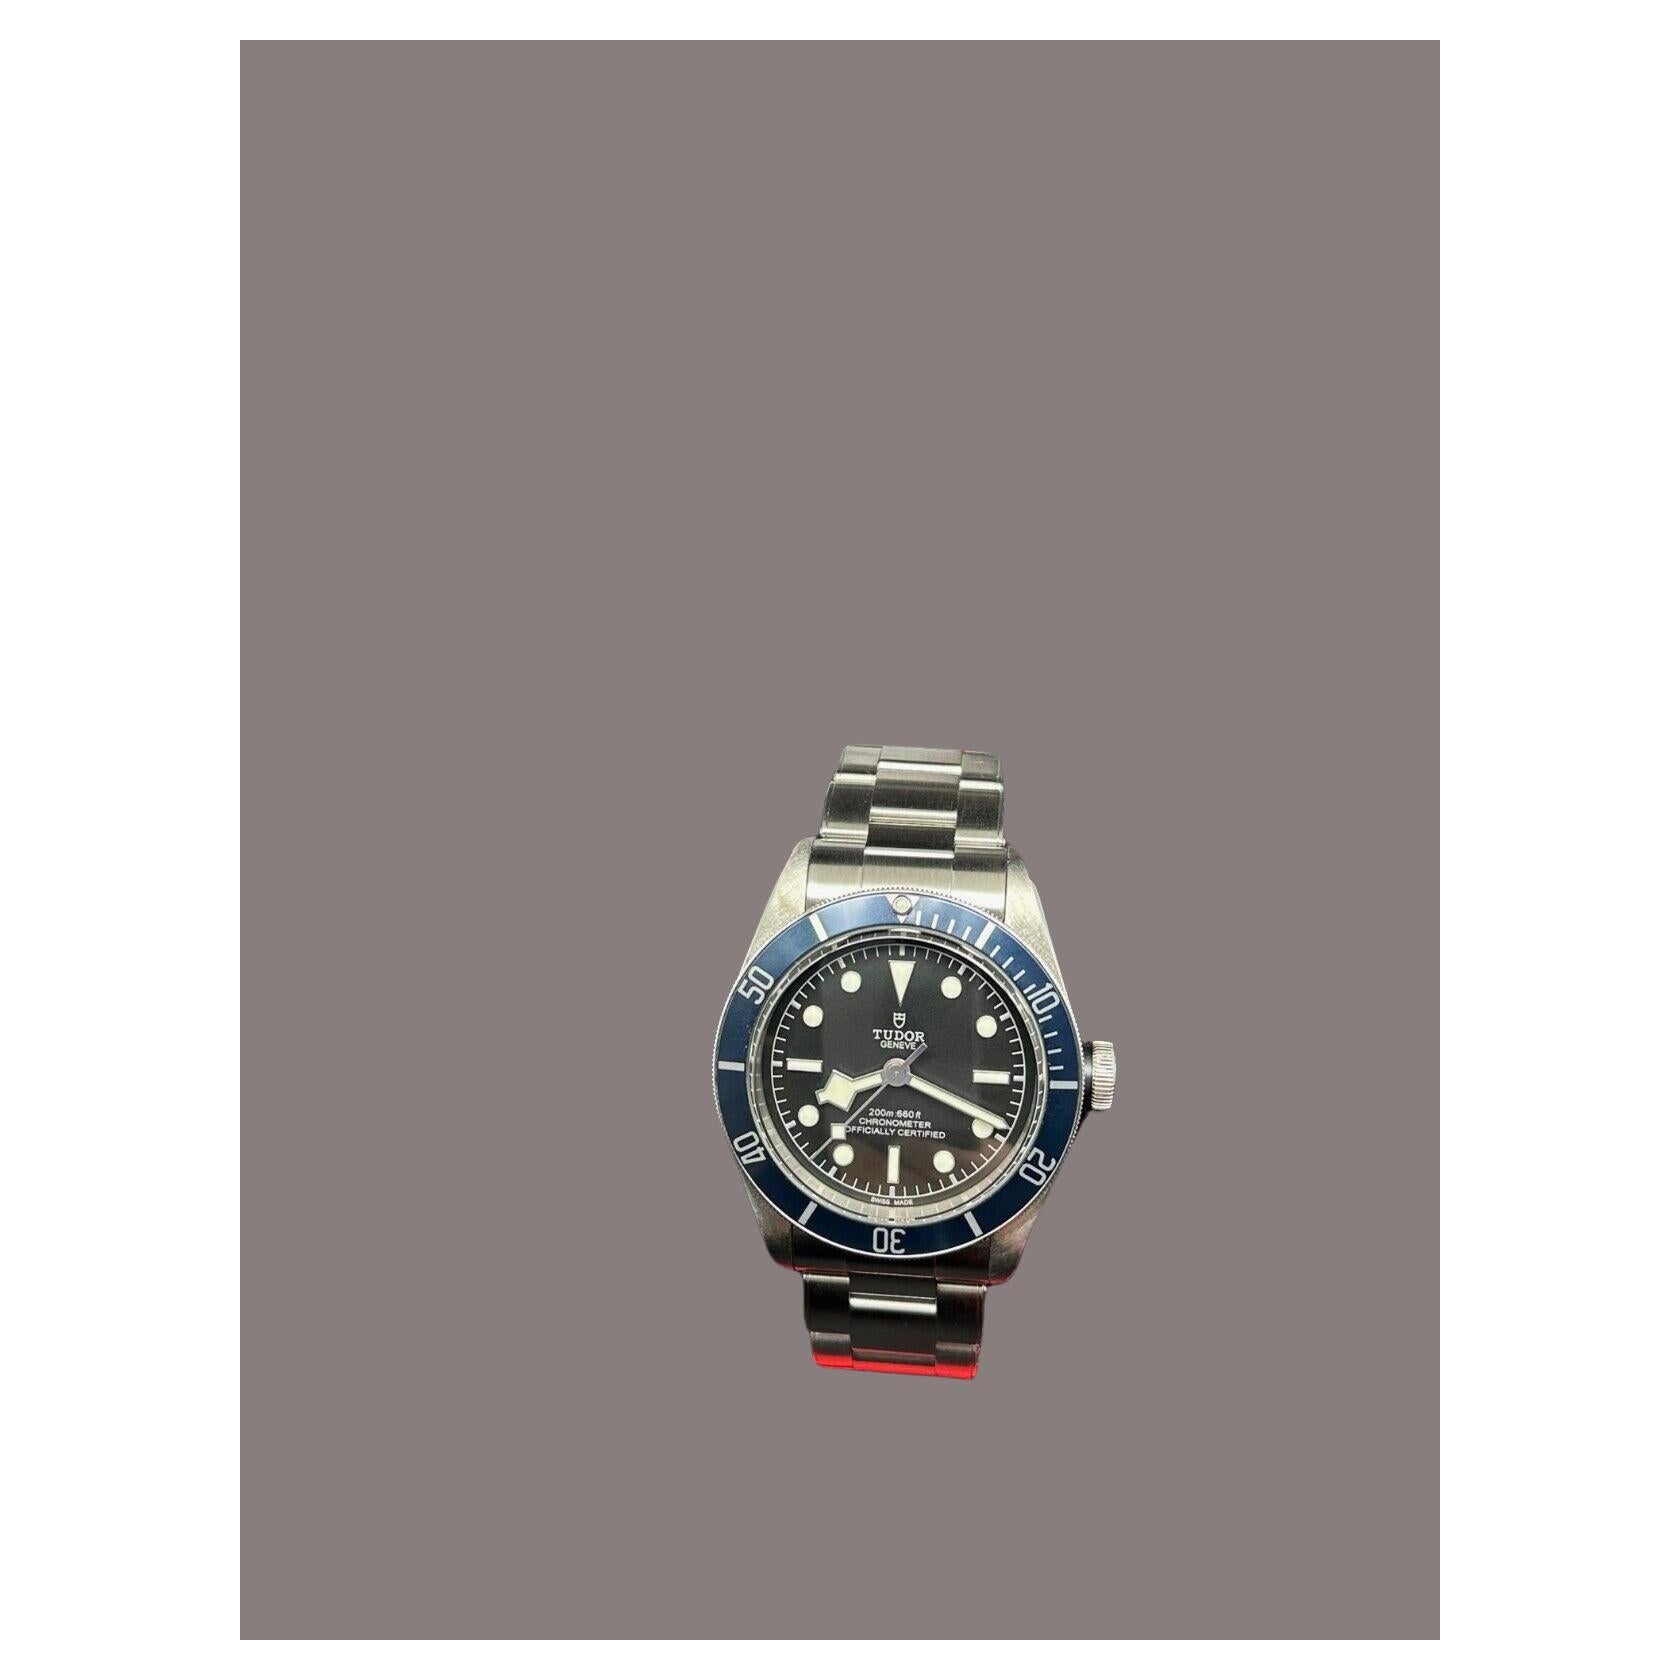 Style Number: 79230B

 

Serial: I731***


Year: 2018

 

Model: Heritage Black Bay

 

Case Material: Stainless Steel

 

Band: Stainless Steel

 

Bezel: Blue

 

Dial: Black

 

Face: Sapphire Crystal

 

Case Size: 41mm

 

Includes: 

-Tudor